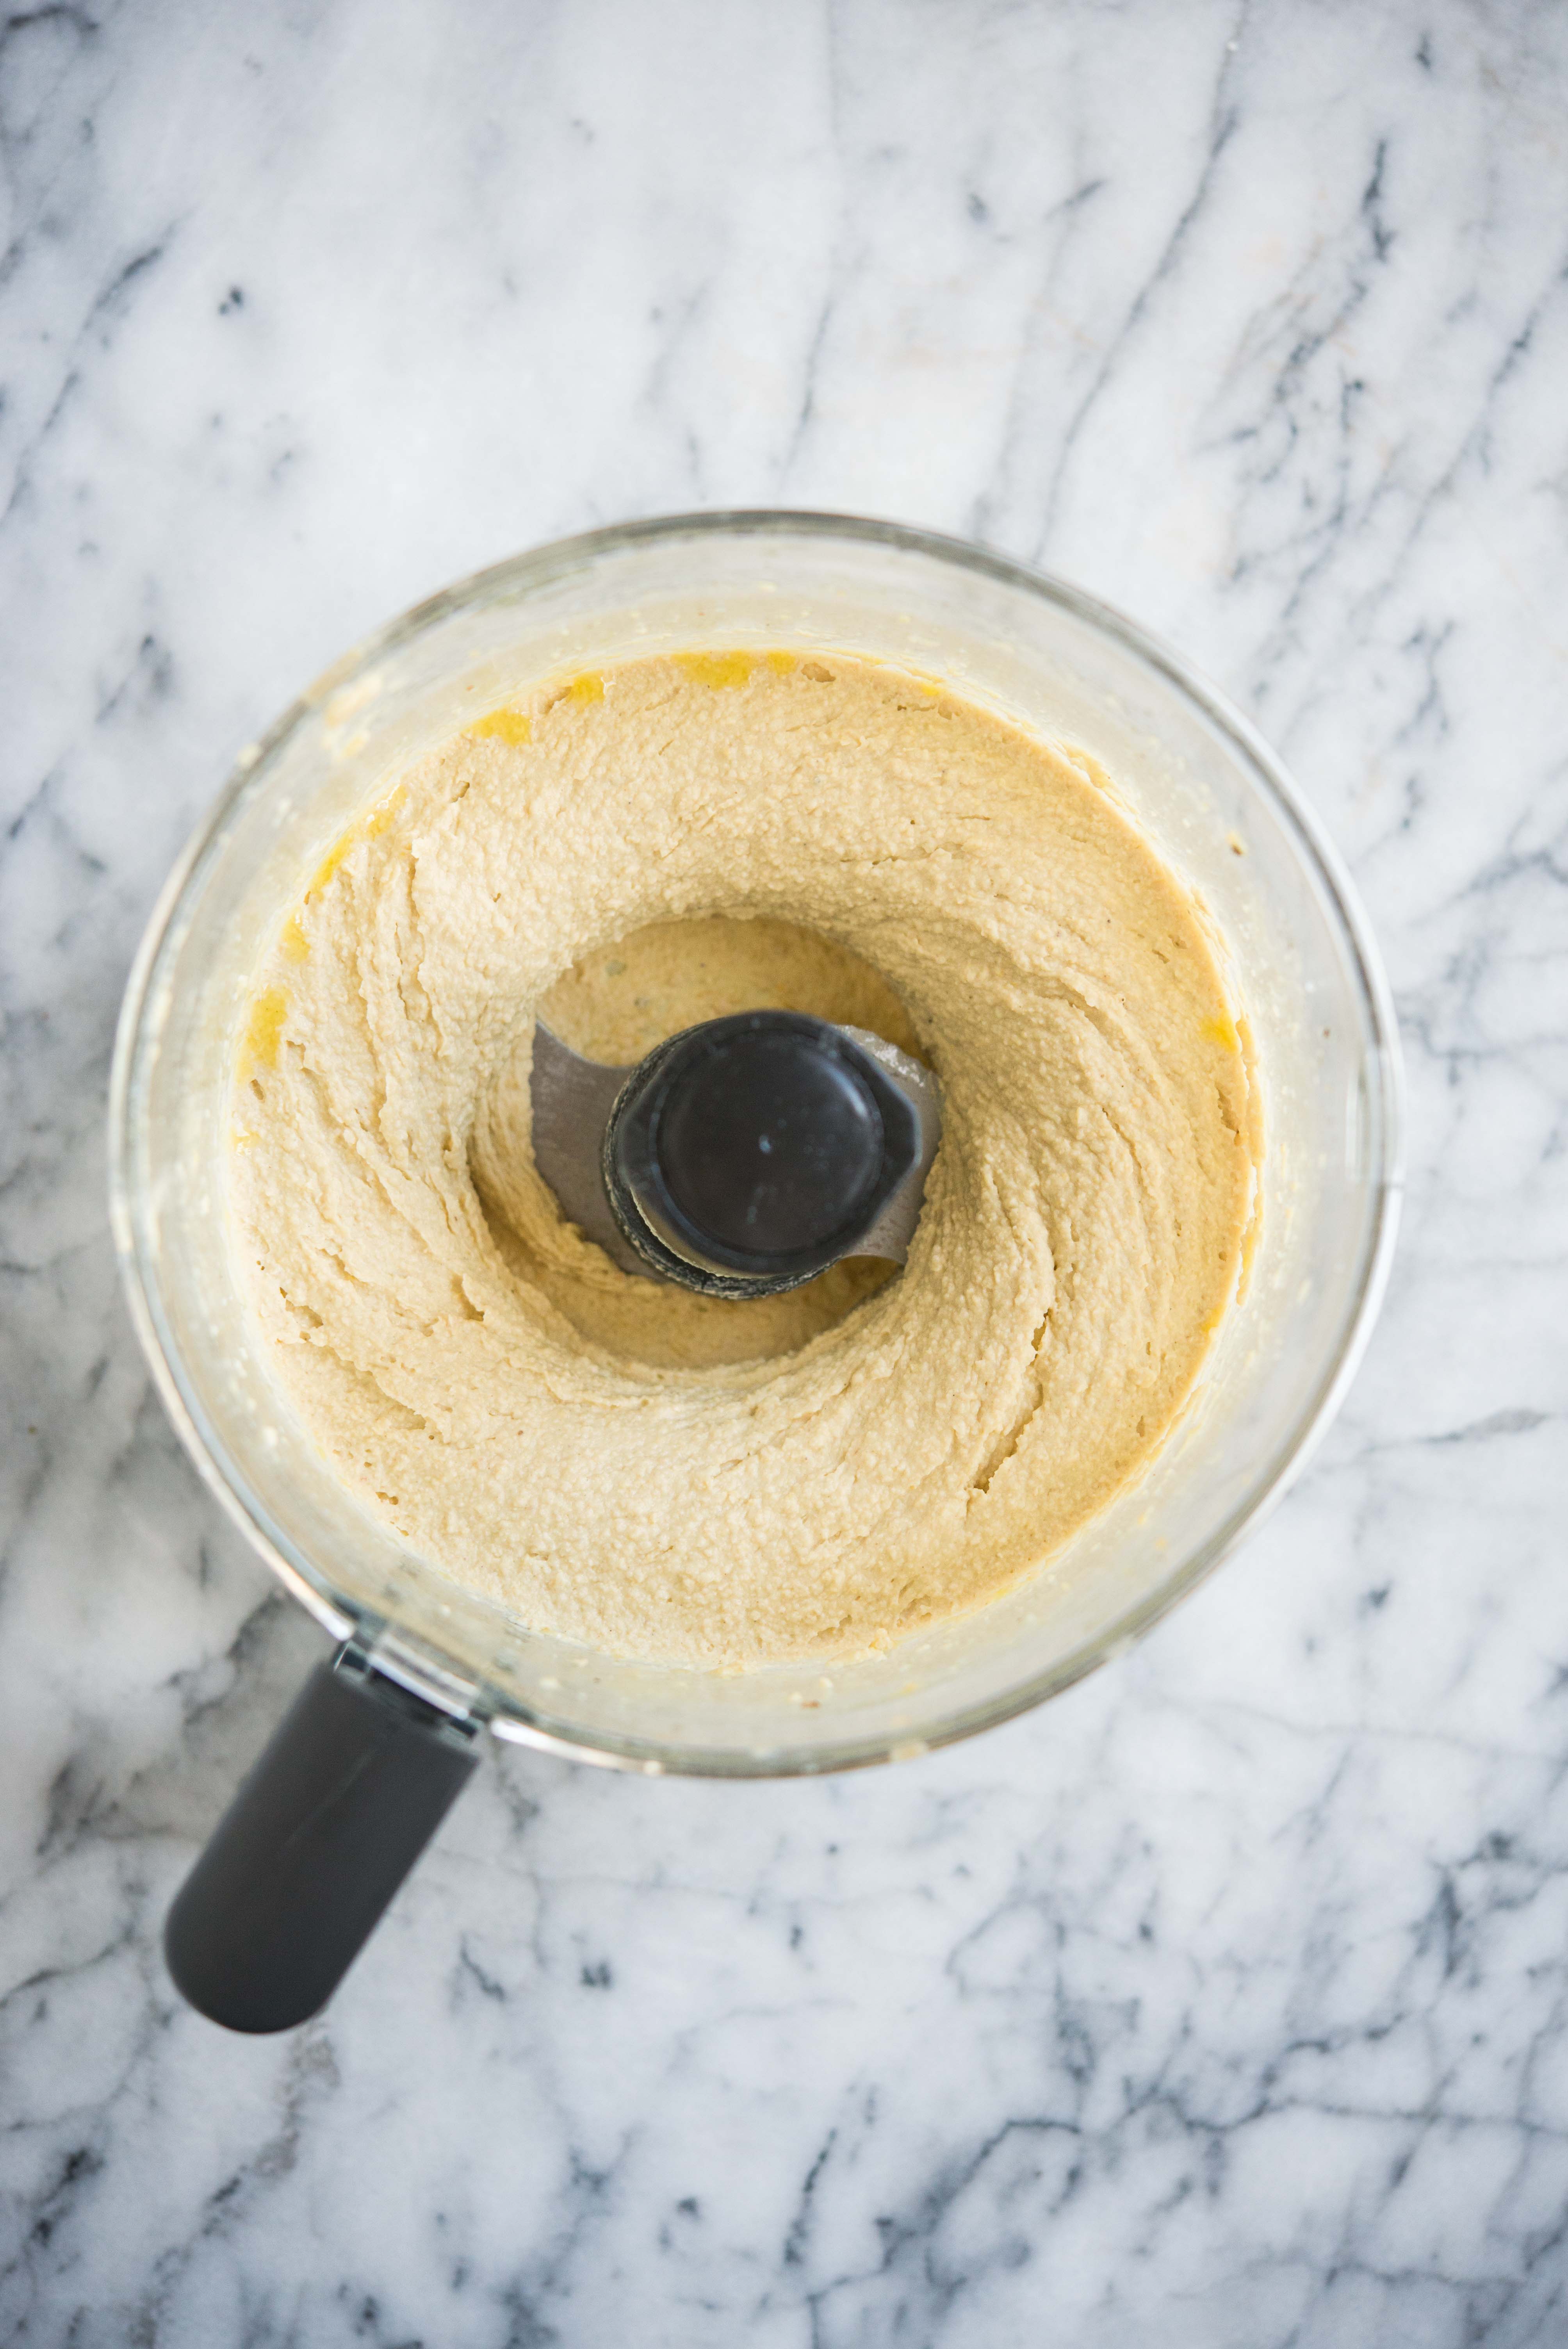 how to make hummus - hummus in a food processor on a marble surface